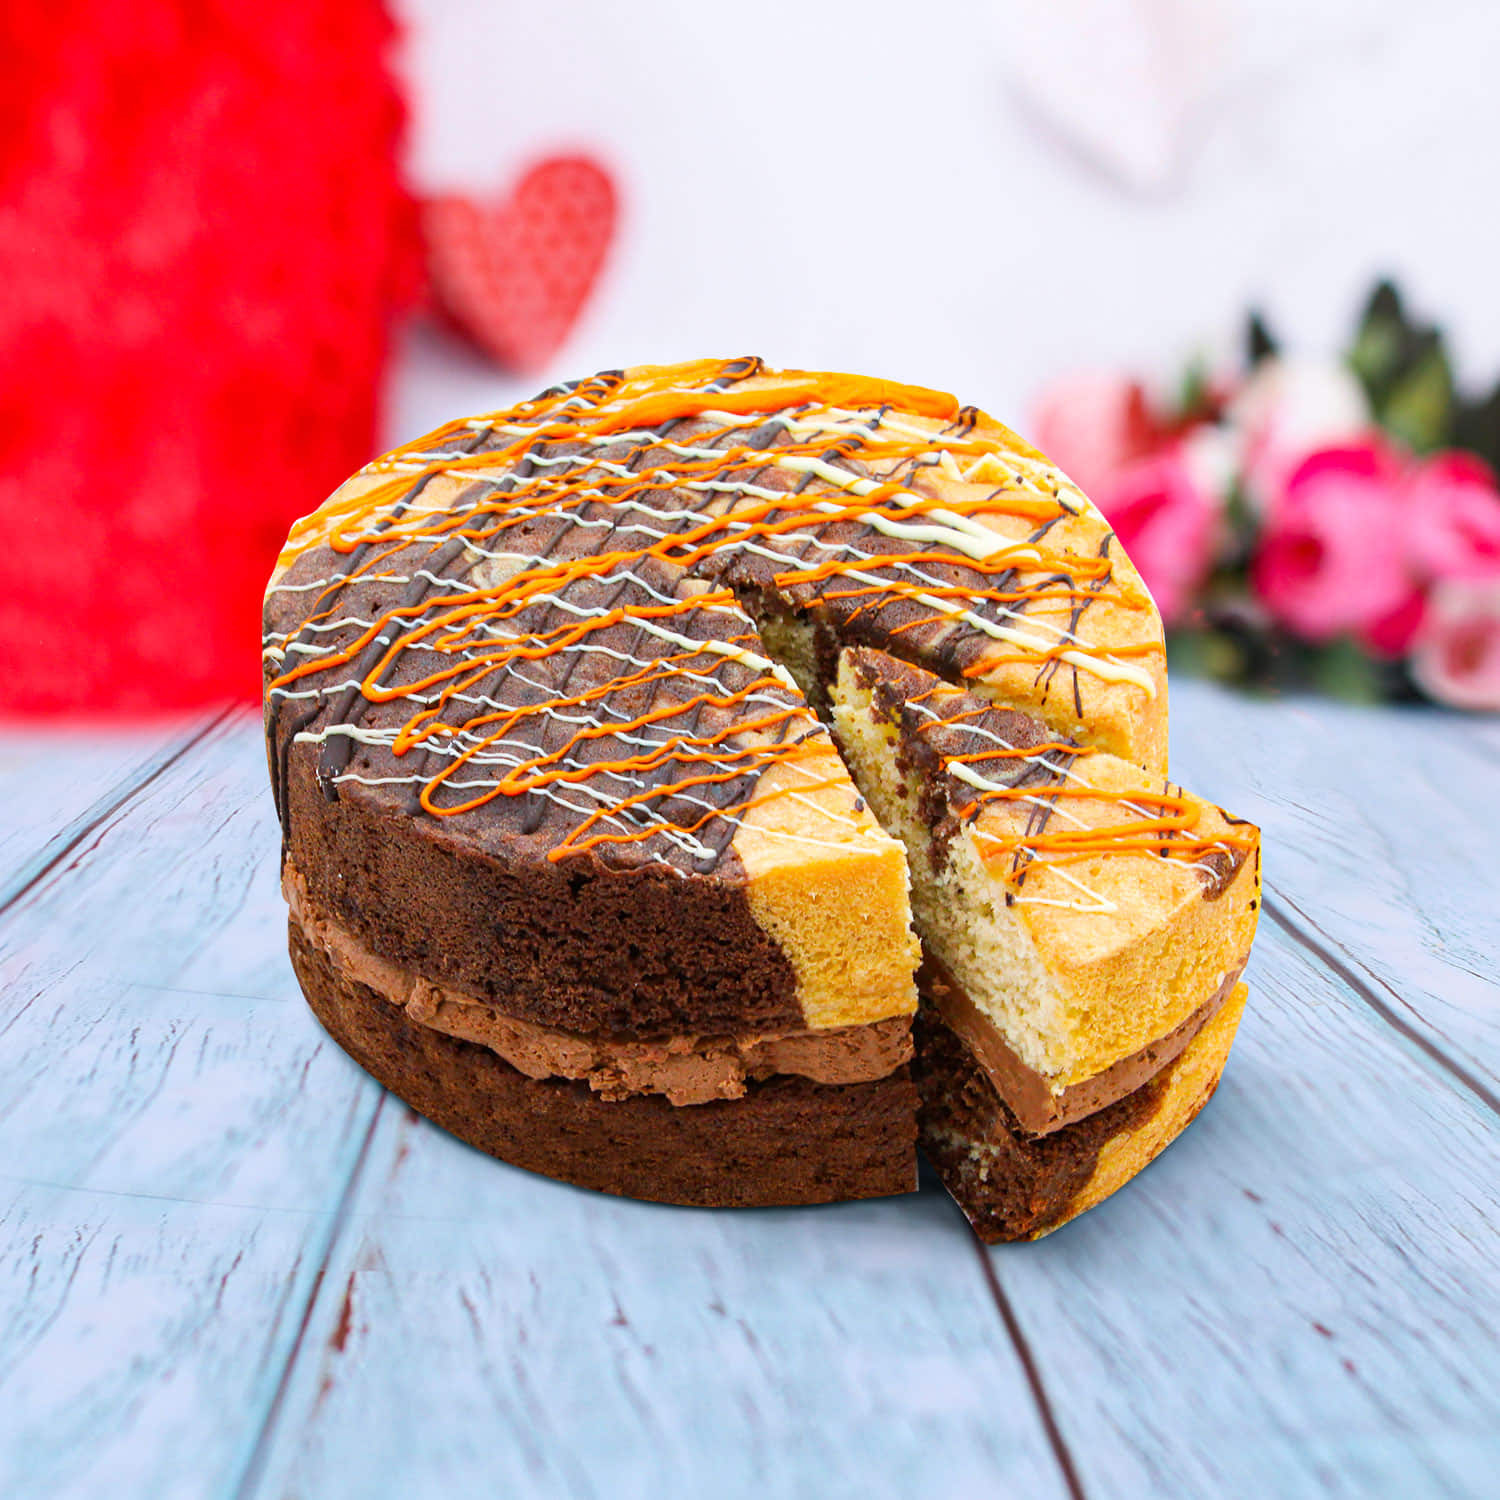 Lovingly Handmade Cakes & Gateaux - UK Home Delivery – Patisserie Valerie